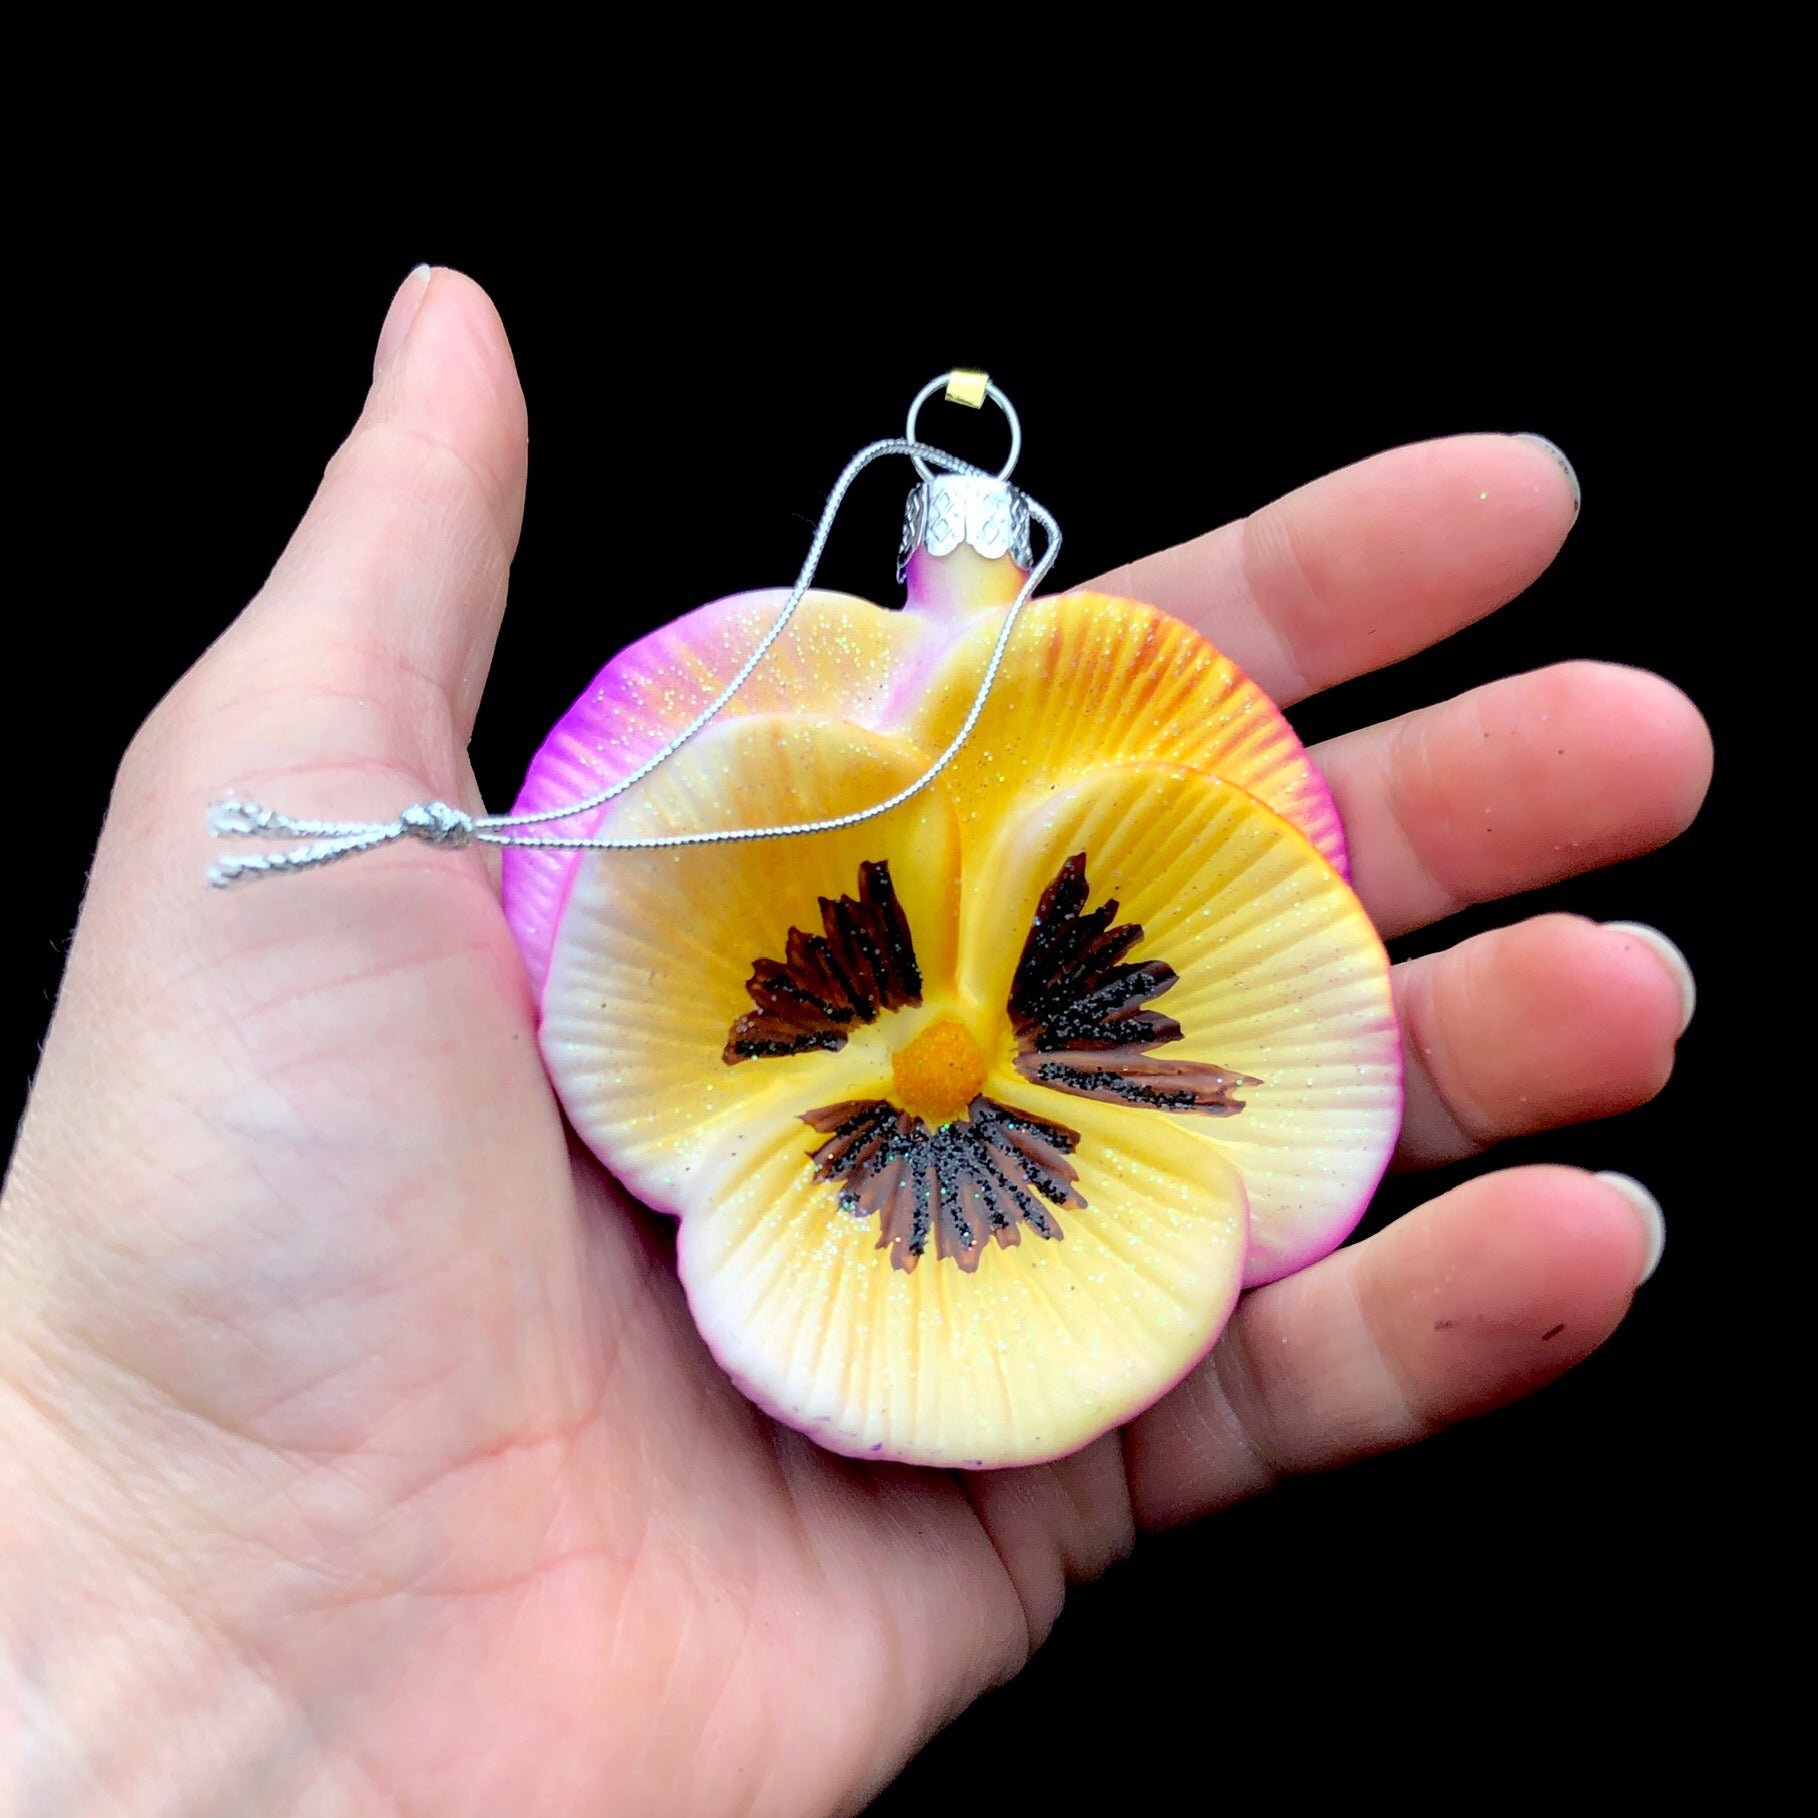 Yellow/Pink Pansy shown in hand